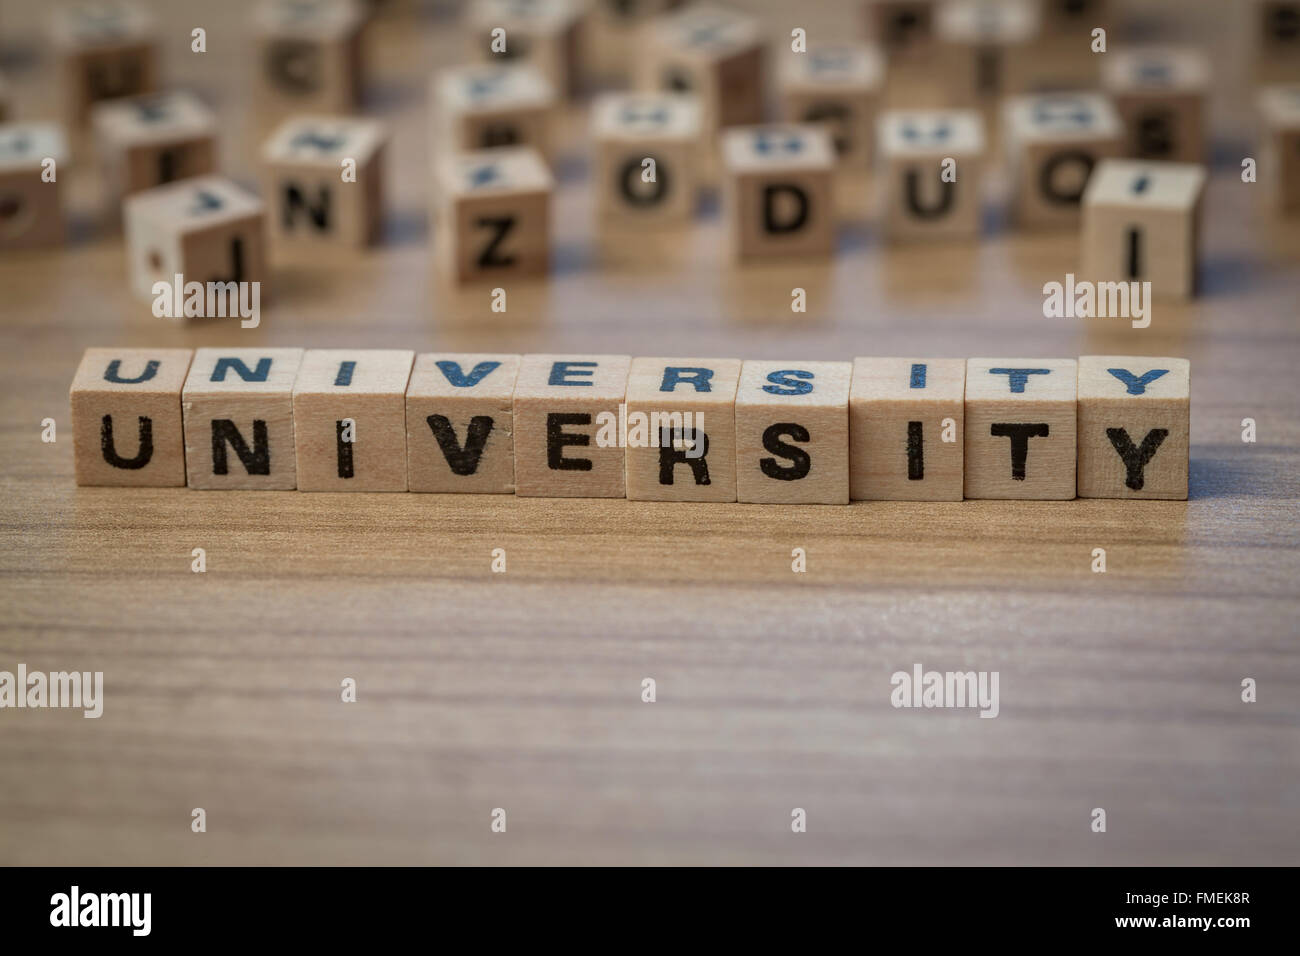 University written in wooden cubes on a table Stock Photo